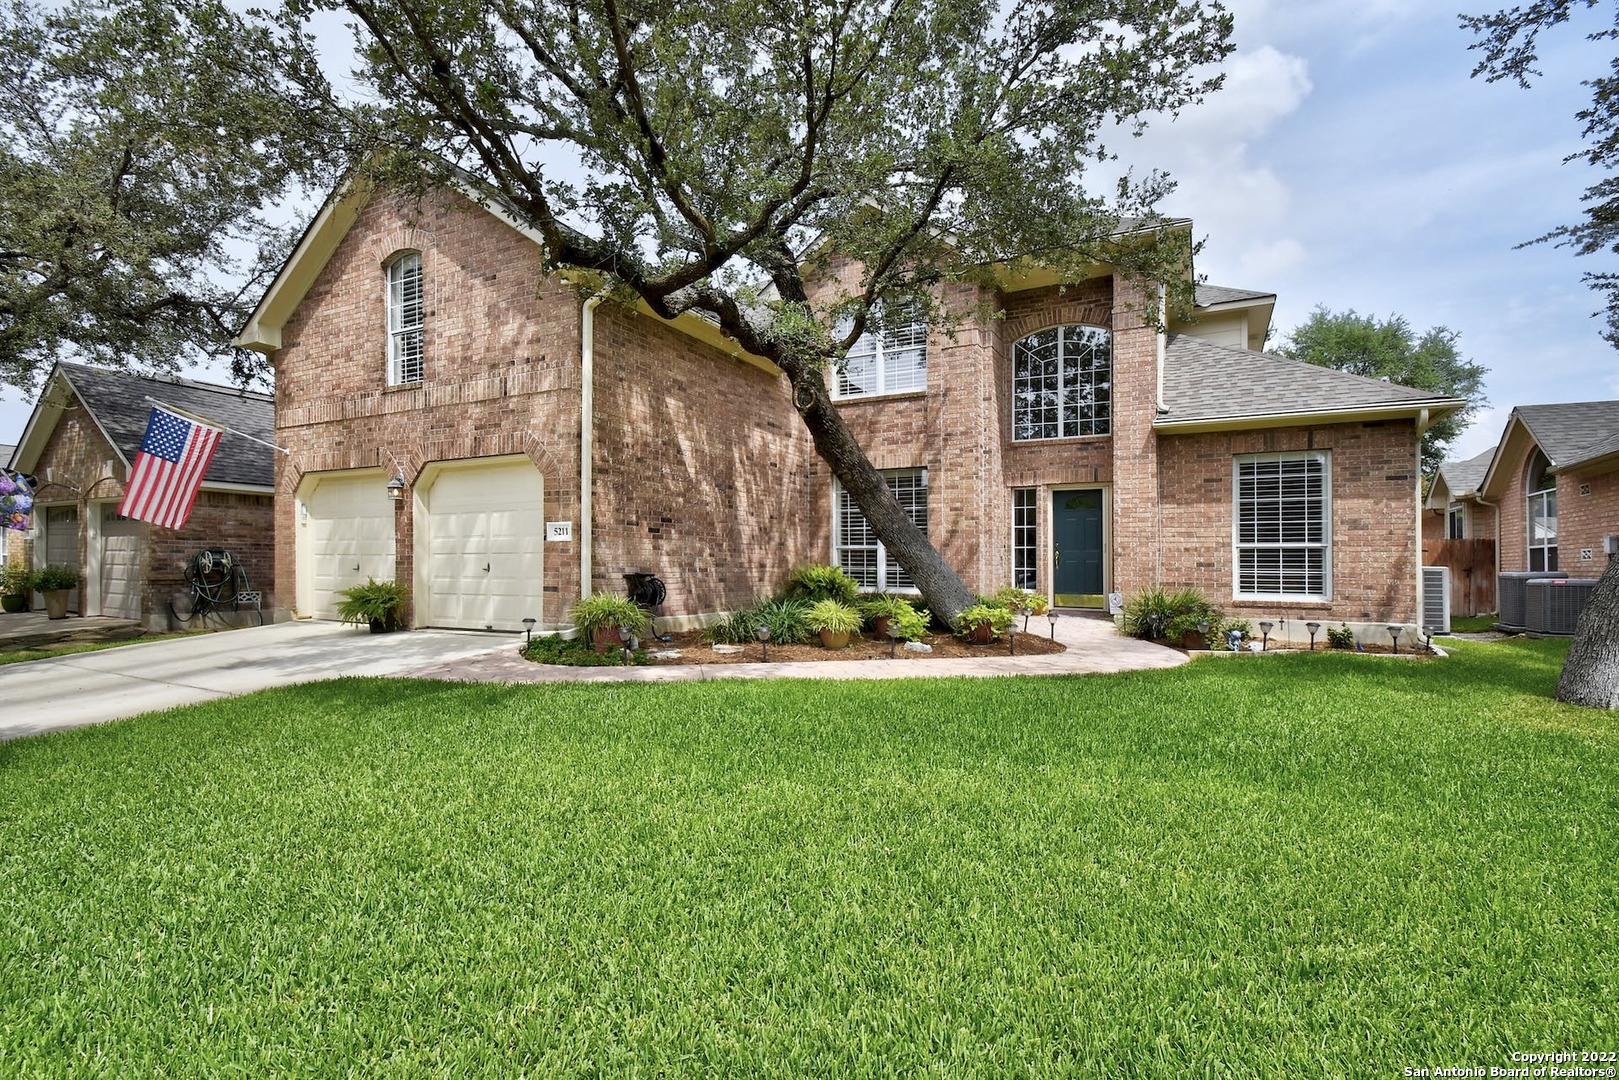 Spectacular home in a quiet gated community minutes from major shopping areas, Medical Center, USAA, La Cantera, and UTSA. Meticulously maintained by the original owner - see the attached page-long list of updates! Entire main level has new wood-look ceramic tile. Additional flex room could be exercise room or office, plus there's a massive 19'x19' upstairs bonus room. Privacy doors and closets were added to flex room and bonus room, so they could even be 5th and 6th bedrooms - the sky's the limit! Kitchen features granite countertops, stainless-steel appliances, and seemingly endless cabinet space. Large upstairs master bedroom offers a retreat-like master bath and large walk-in closet. Spacious family room has a gas fireplace and floor-to-ceiling windows overlooking the picturesque backyard oasis. So much more to see - come experience this gorgeous home today!  Virtual tour at https://www.seetheproperty.com/u/425492    ***OPEN HOUSE Saturday 9/10, 10am-1pm***